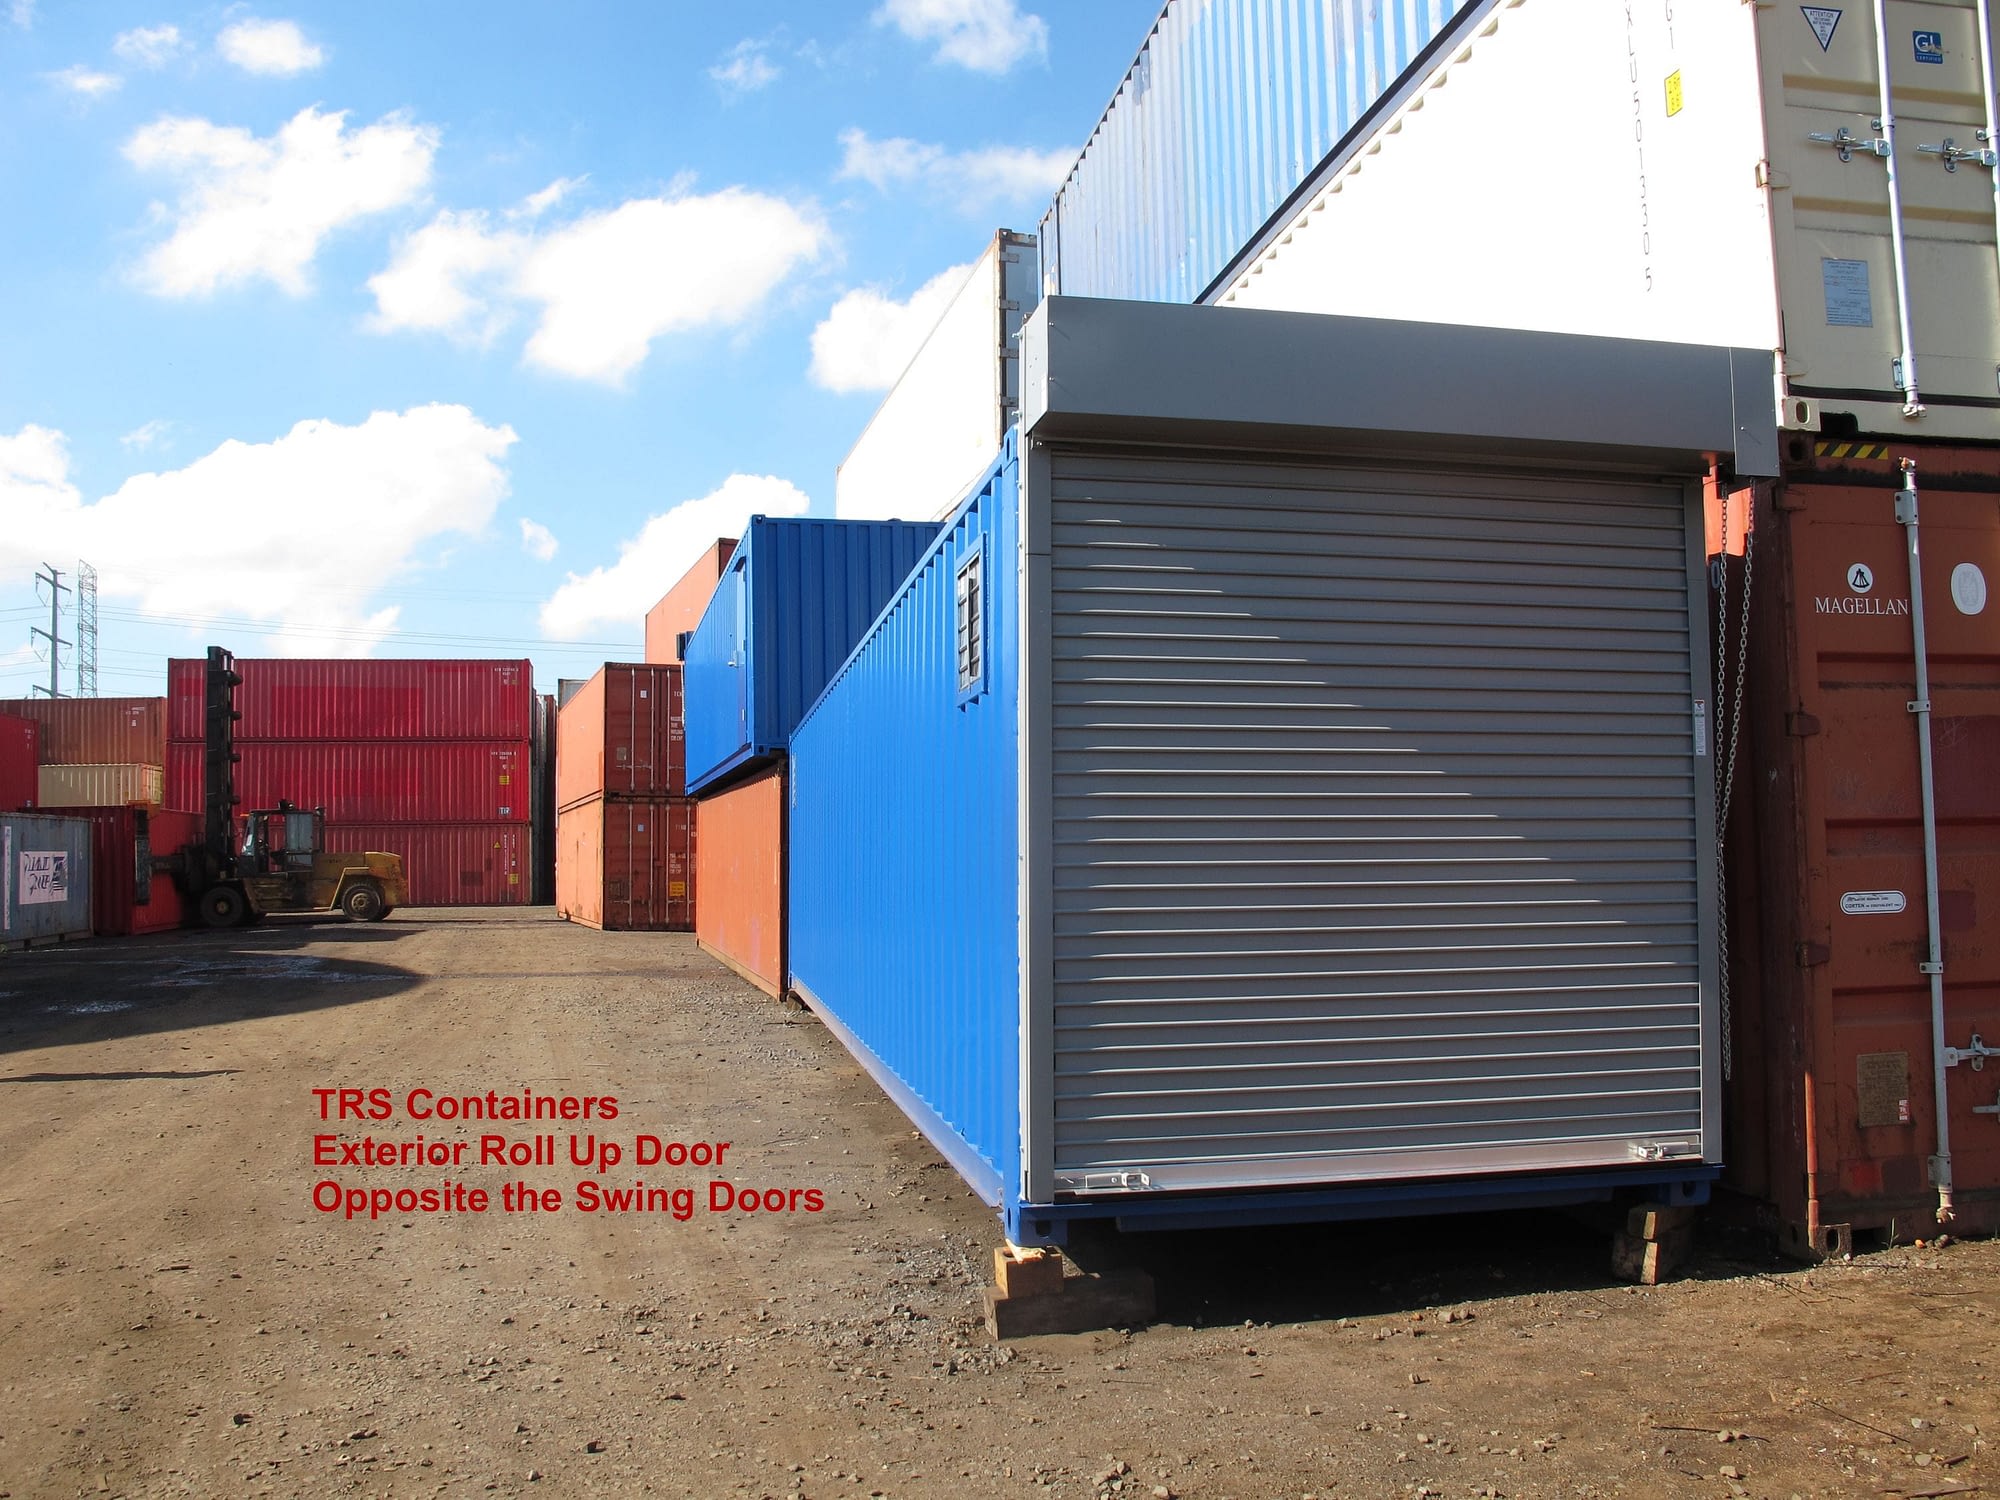 TRS Containers can install additional doors as interior mount or exterior mount doors